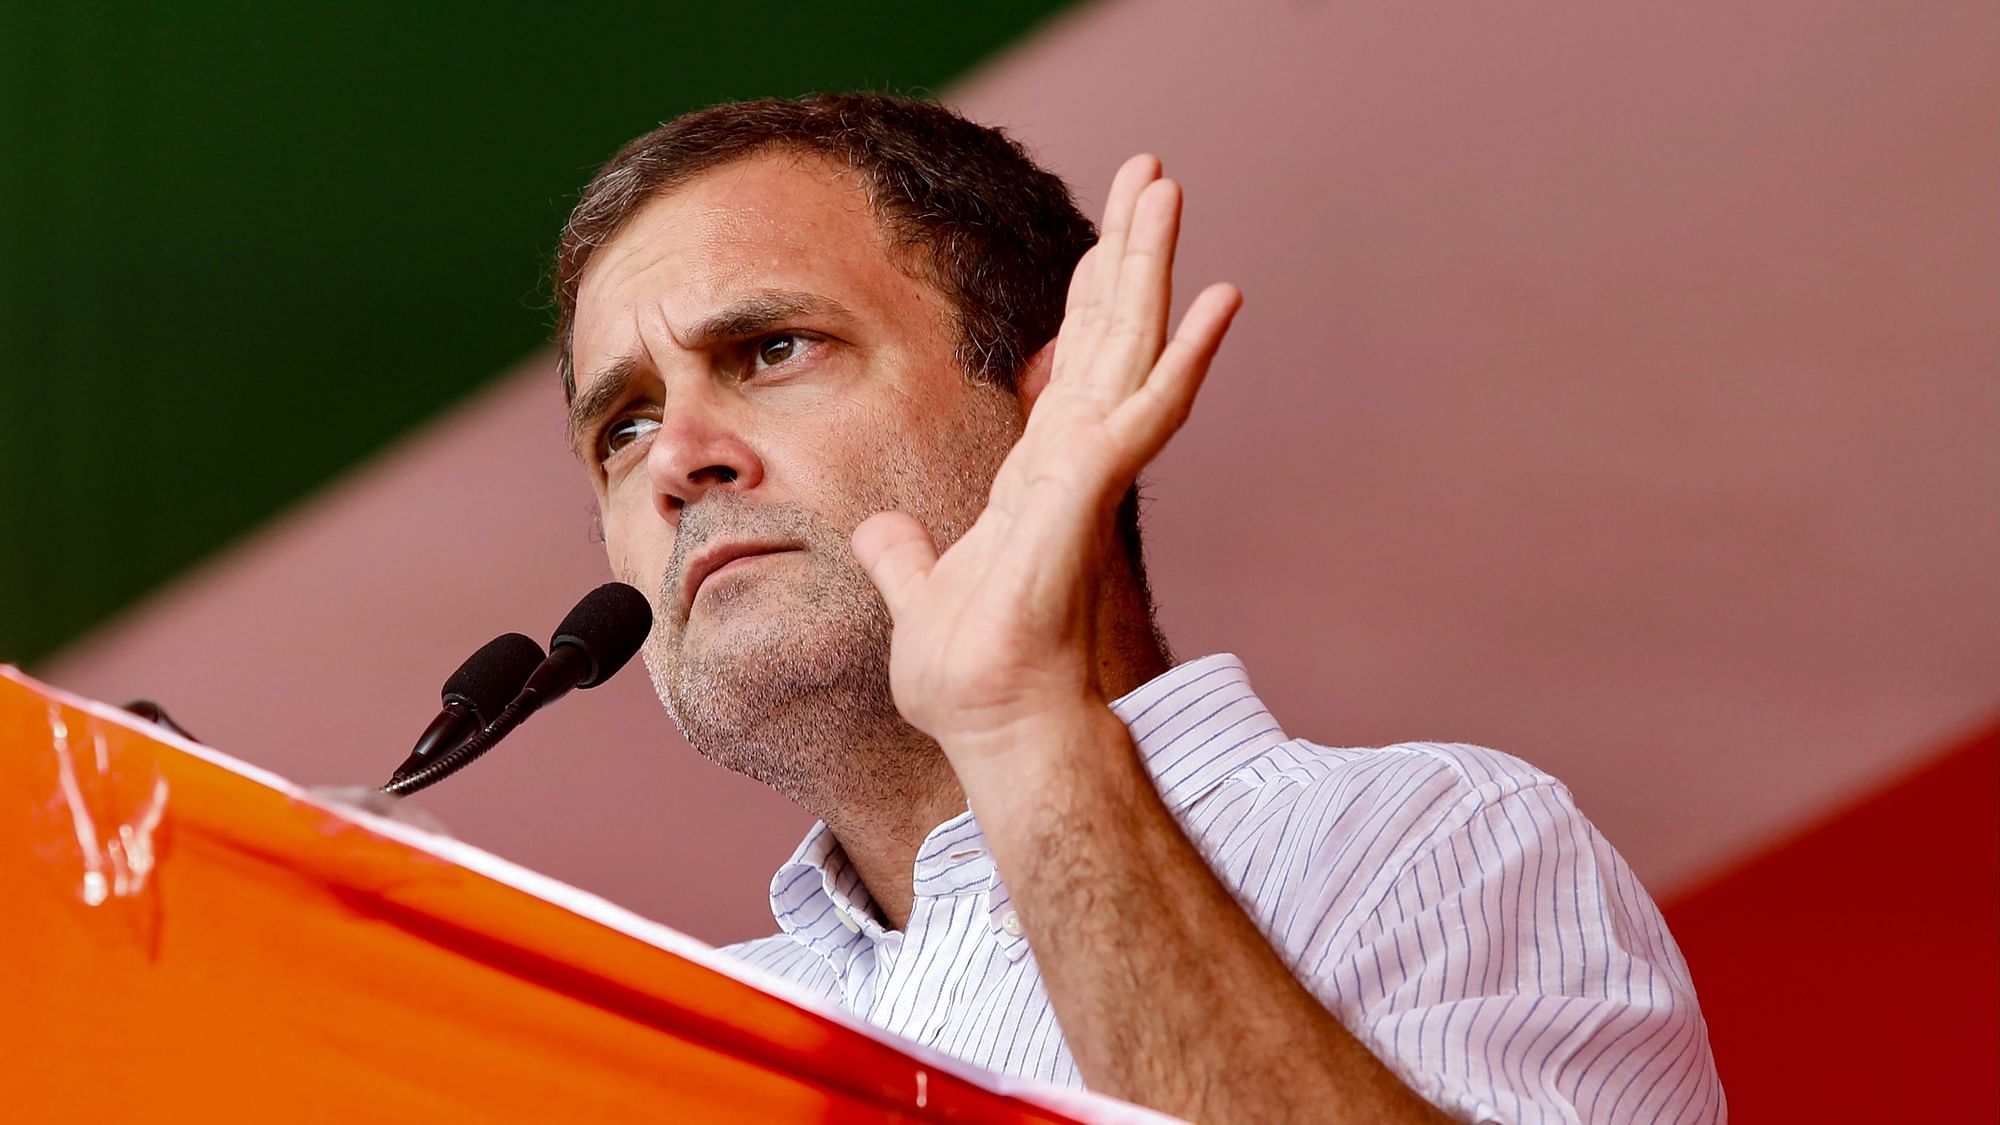 Congress leader Rahul Gandhi on Tuesday, 20 April, announced that he had tested positive for COVID-19.